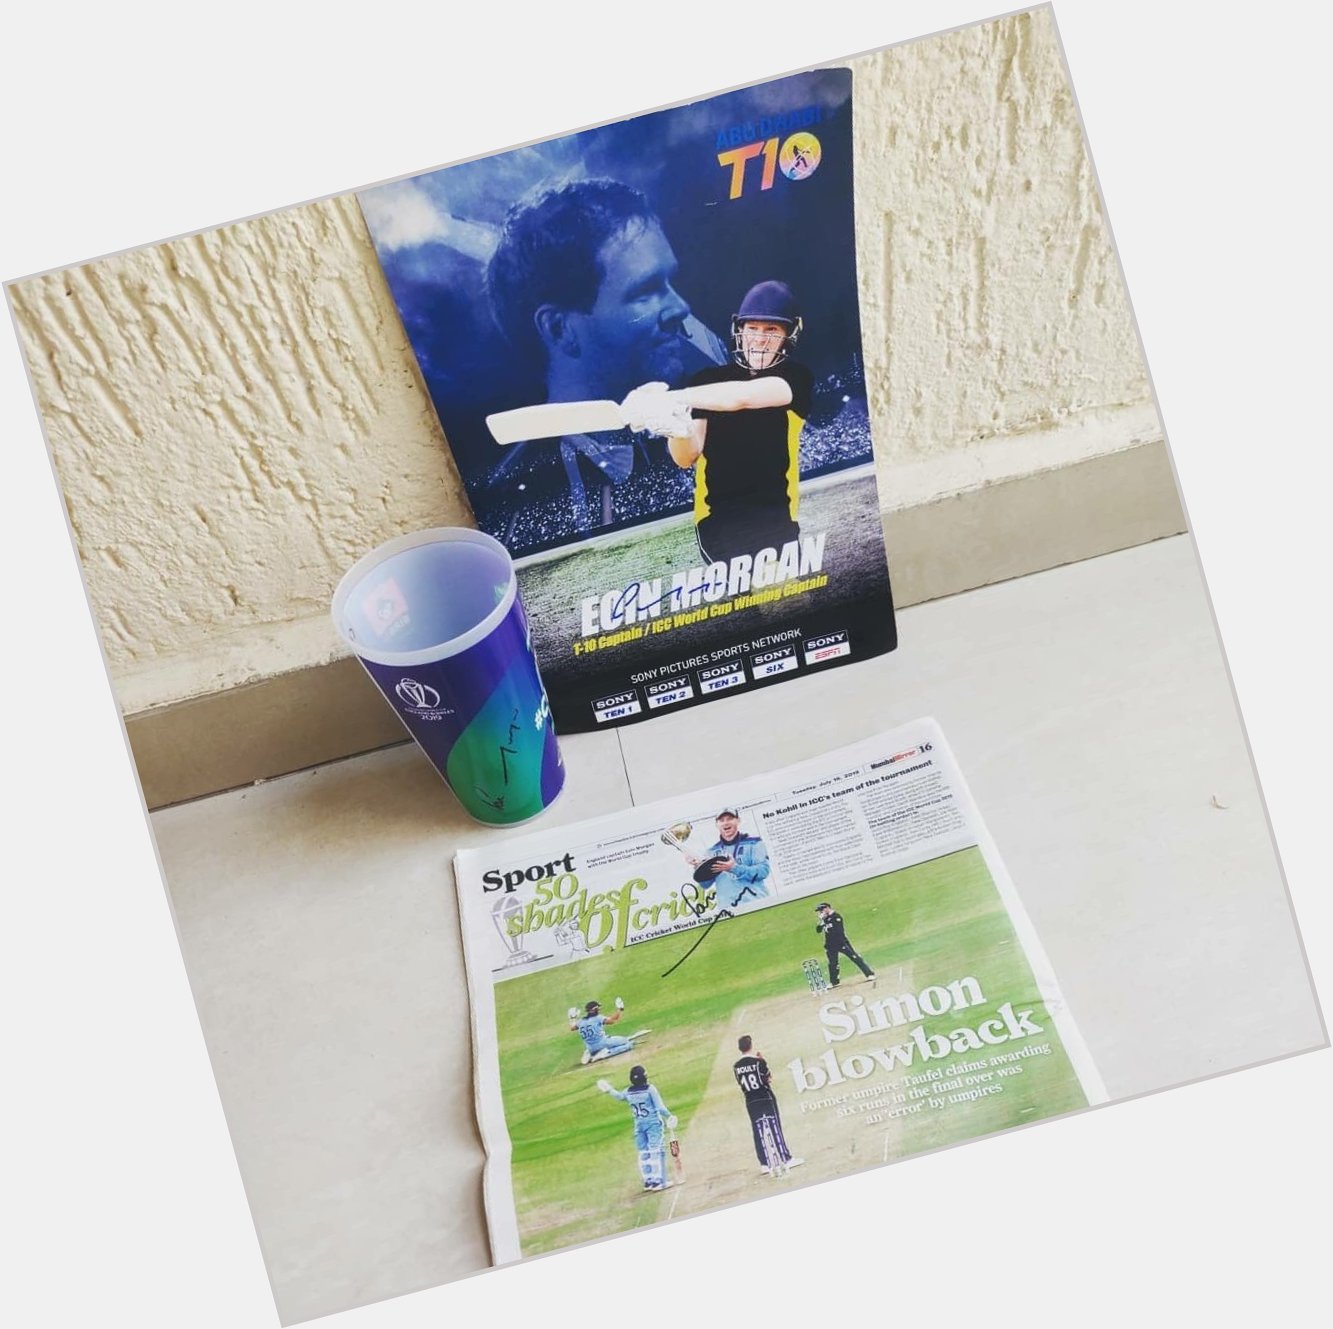 Happy birthday Eoin Morgan! 

My collection of autographed merchandise      